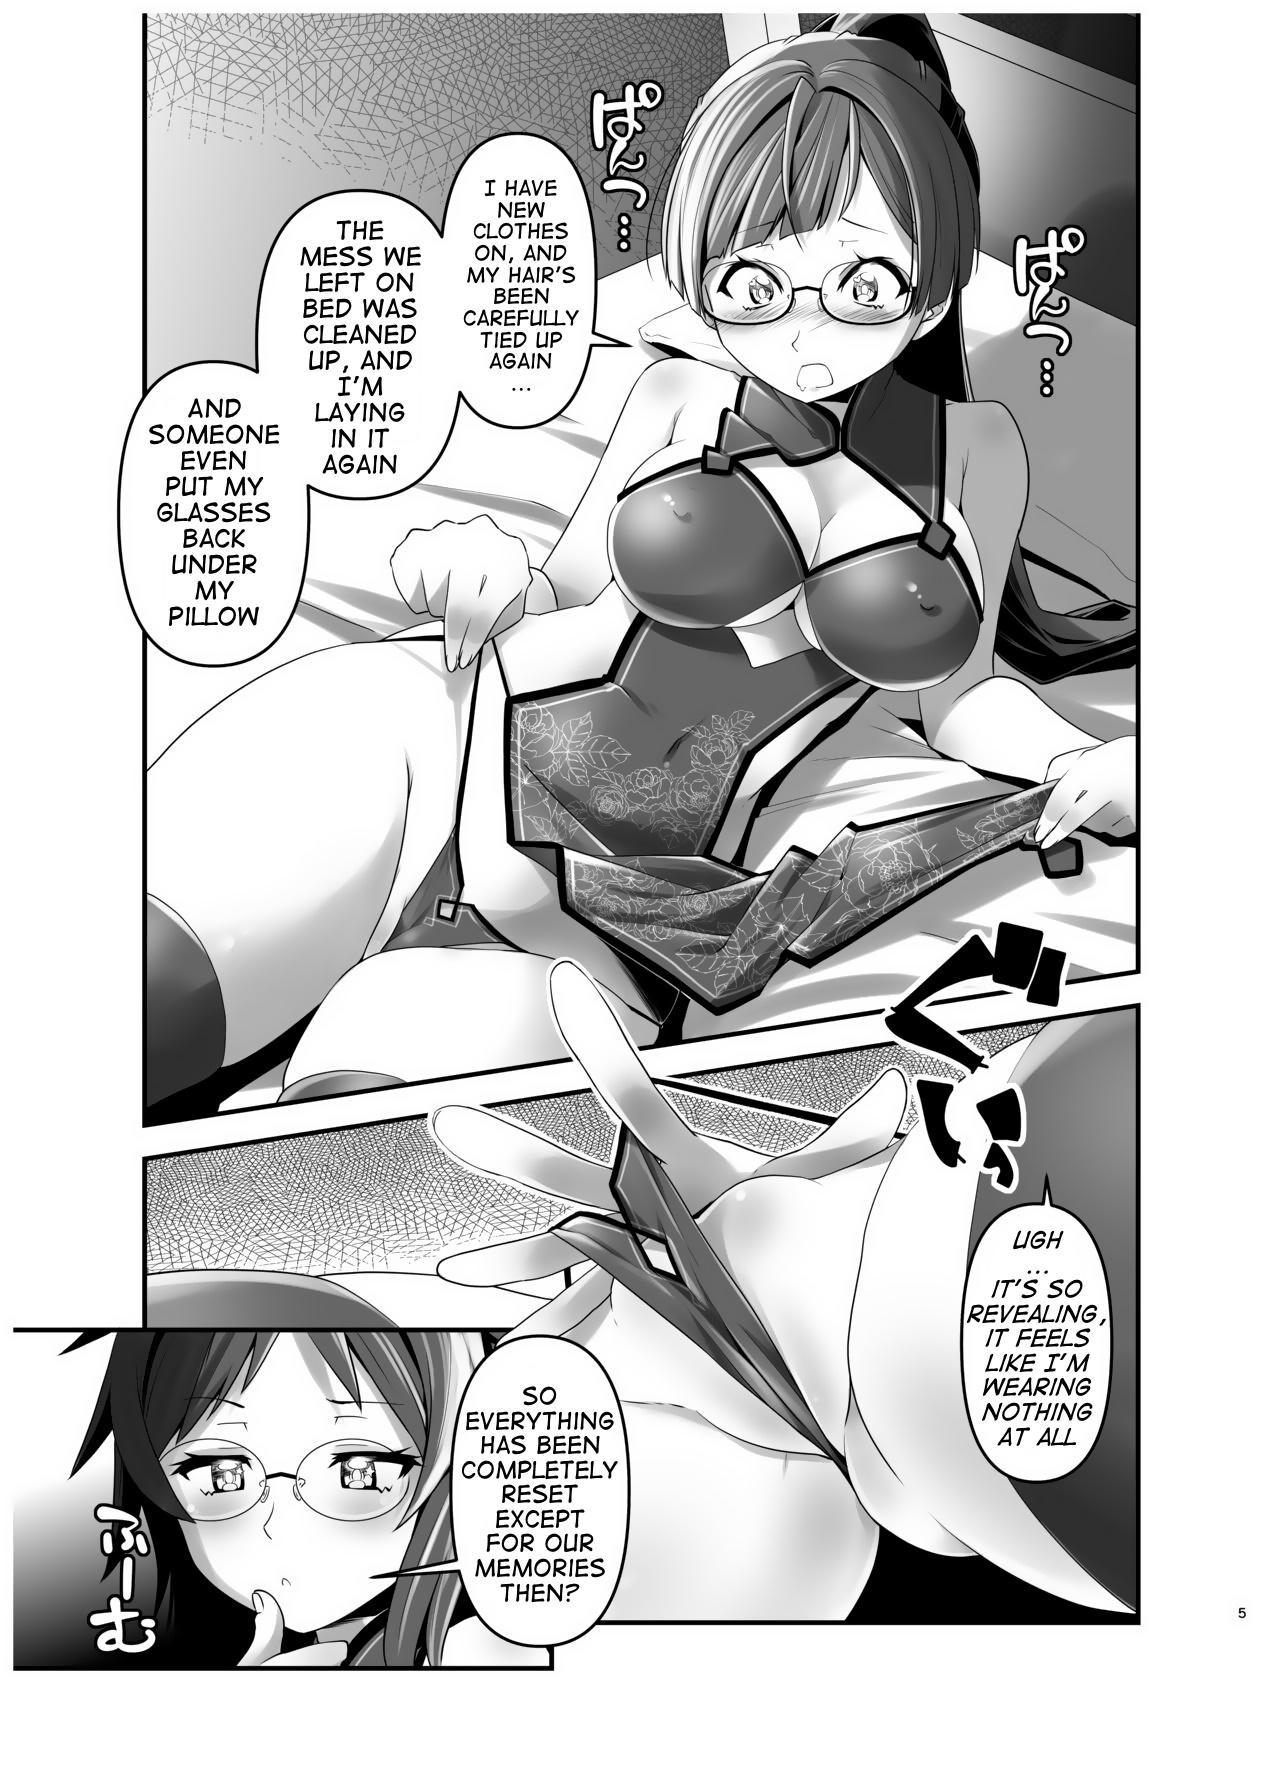 Groupsex Ore ga Bunretsu shite Isekai de TS suru Hanashi 4 | The Story of How I Split Up and TS In a Different World Ch 4 Tribute - Page 4